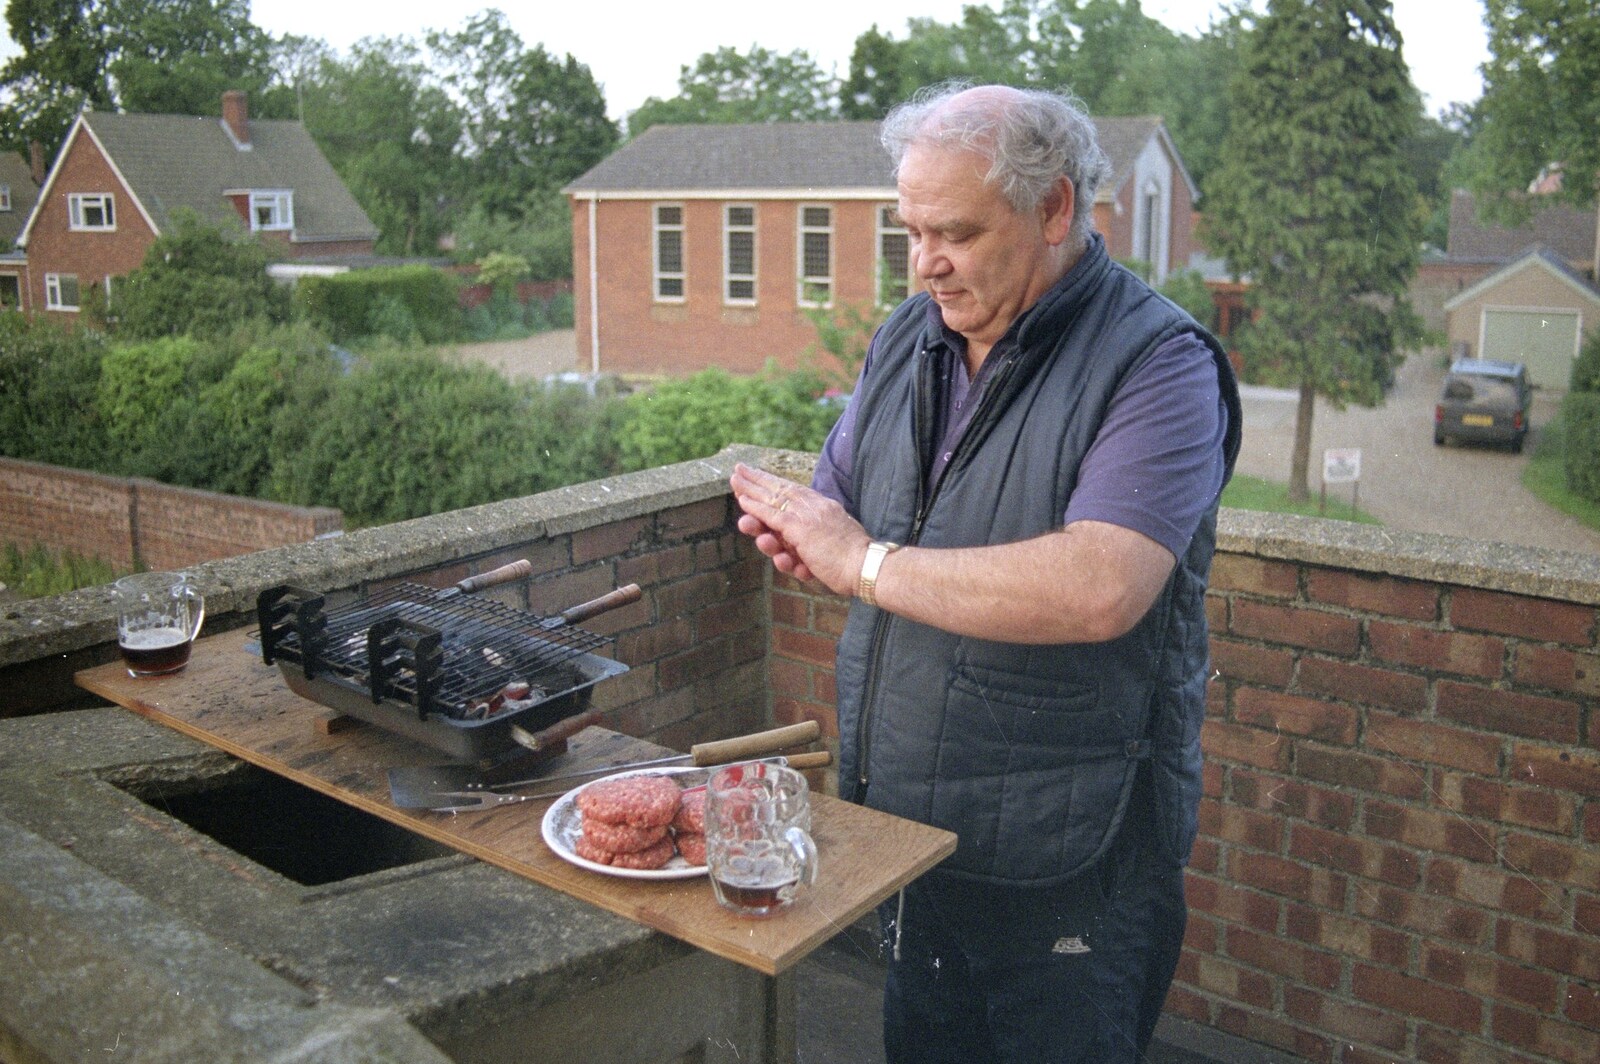 Kenny pats some burgers together on his balcony from An "Above The Laundrette" Barbeque, Diss, Norfolk - 28th May 1990